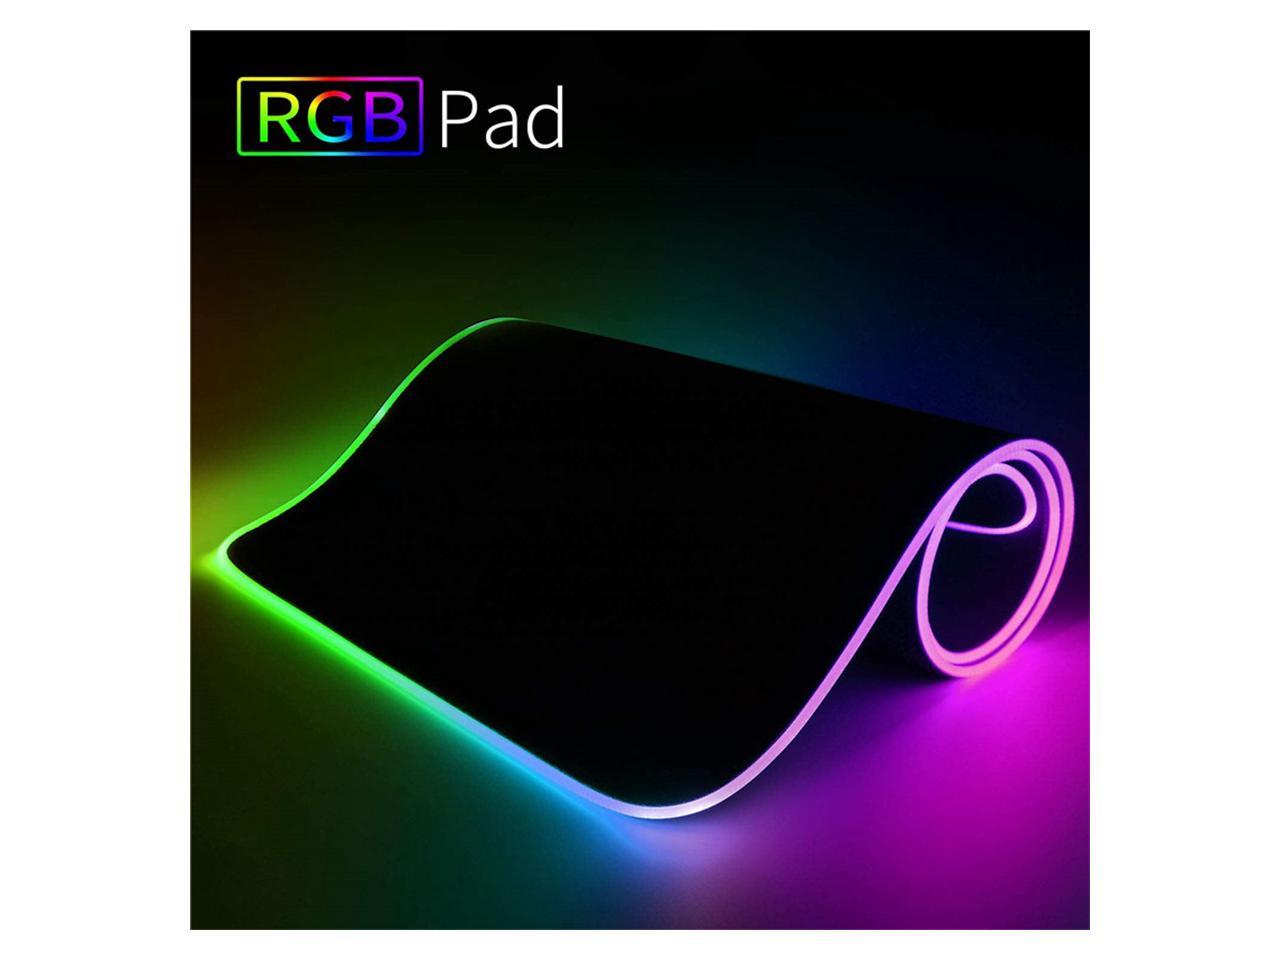 5v 120mA RGB Led Computer Mouse Pad for Gaming/Office Work For keyboard